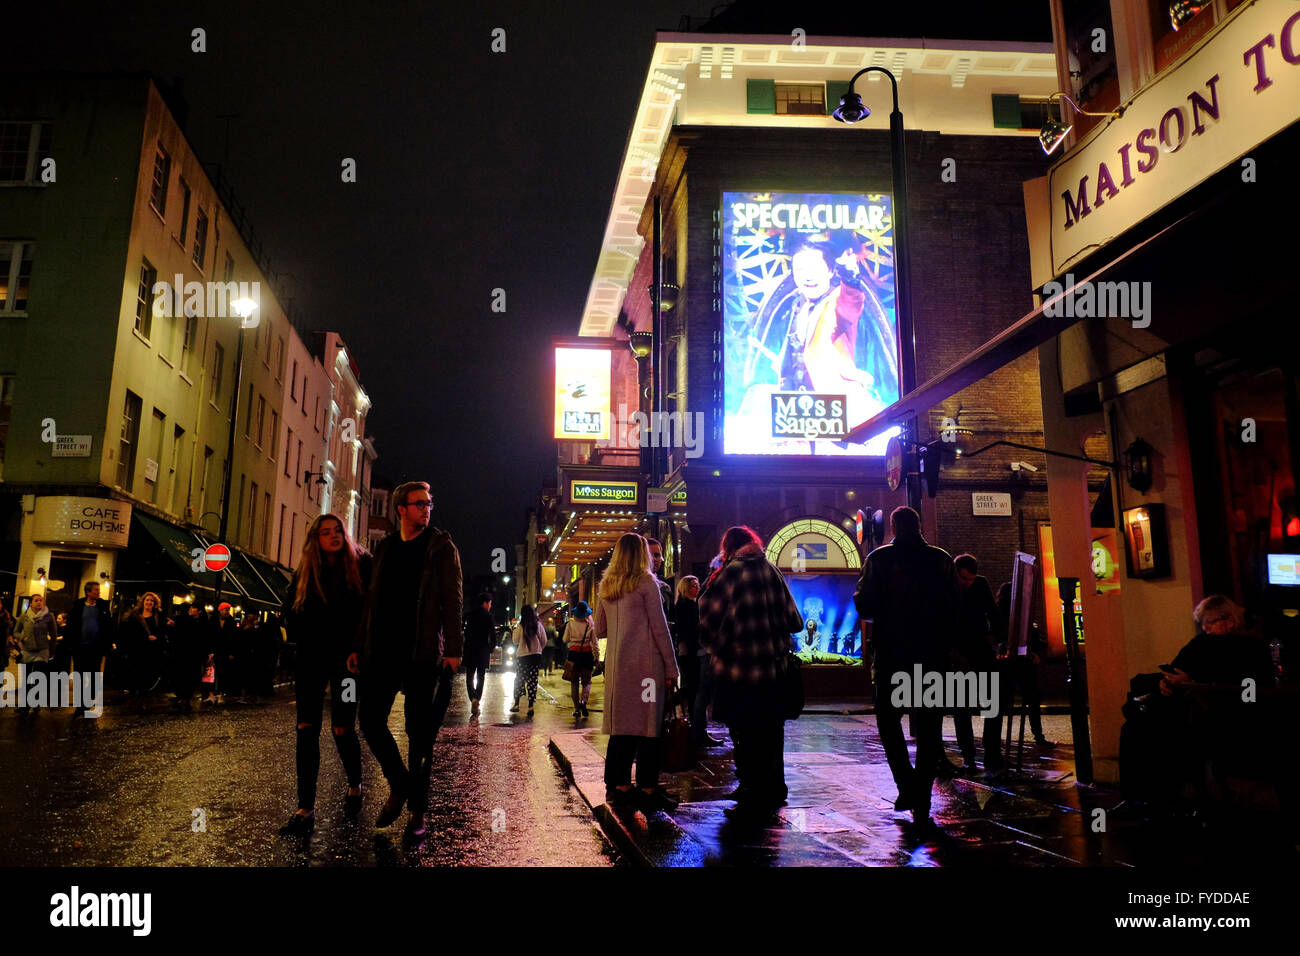 Prince Edward Theater showing Miss Saigon at night surrounded by bars and Cafés with people enjoying a night out in Soho, London Stock Photo